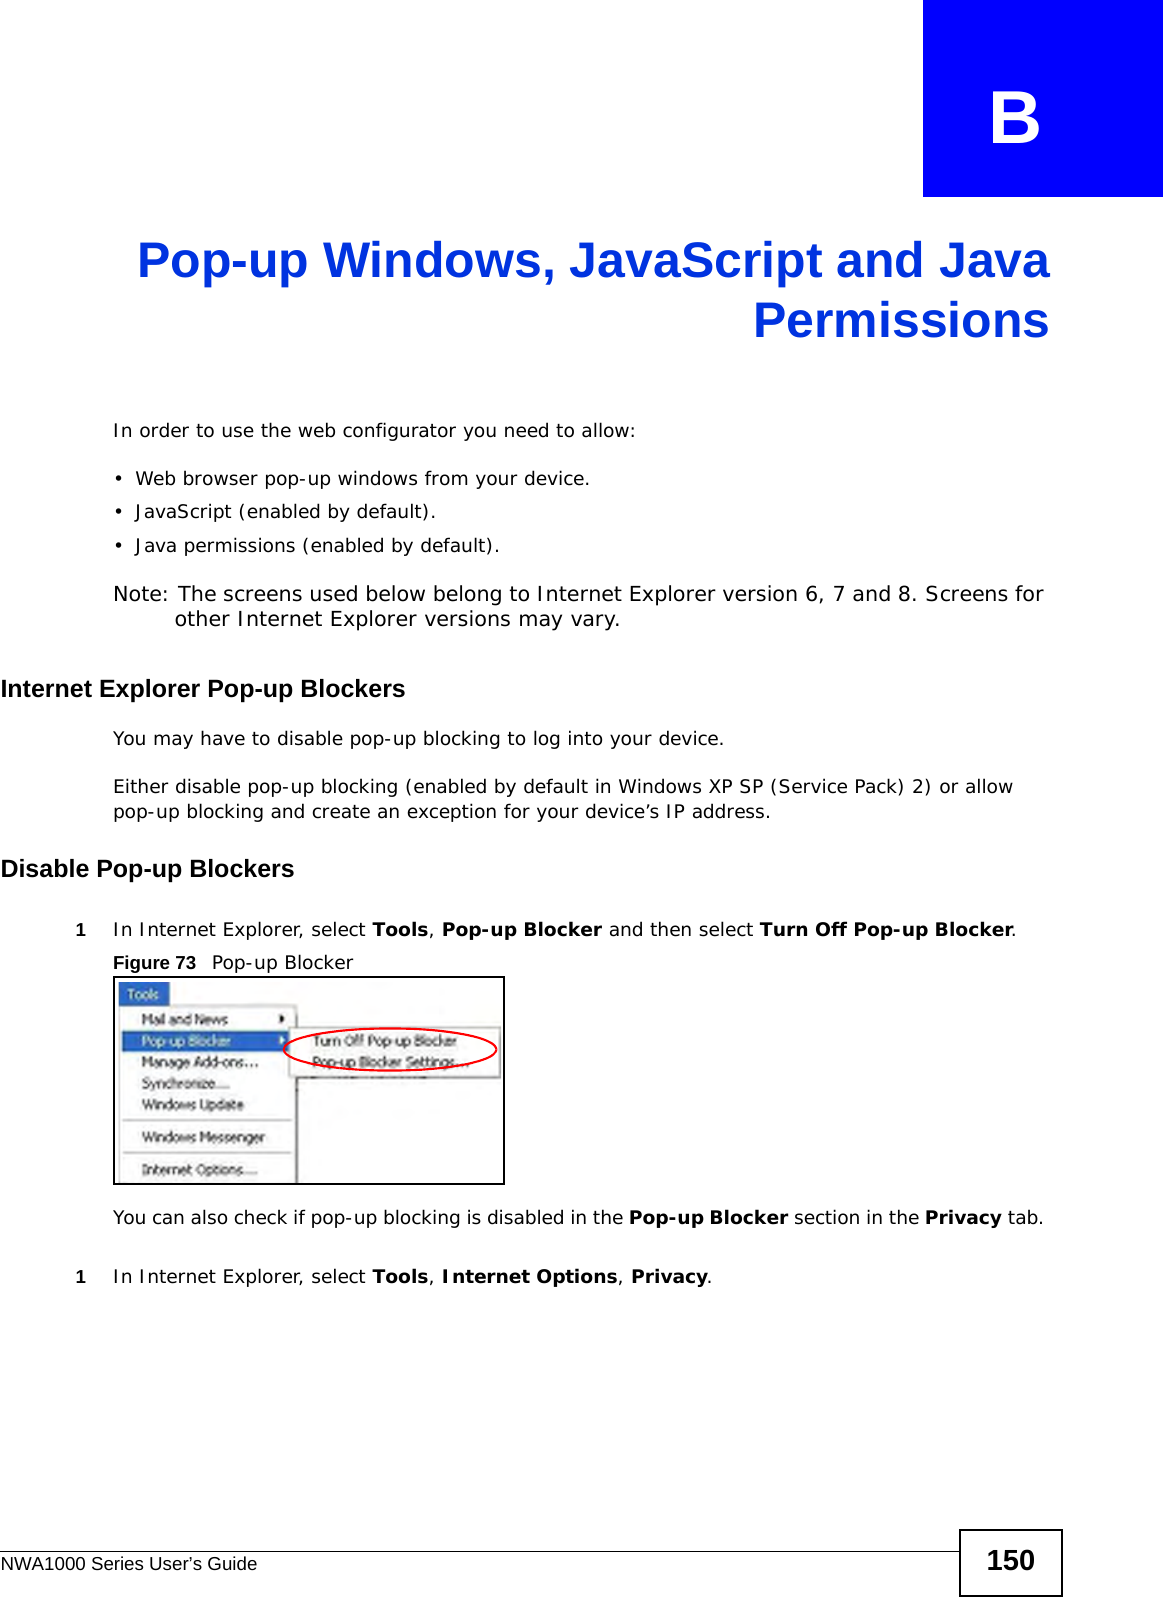 NWA1000 Series User’s Guide 150APPENDIX   BPop-up Windows, JavaScript and JavaPermissionsIn order to use the web configurator you need to allow:• Web browser pop-up windows from your device.• JavaScript (enabled by default).• Java permissions (enabled by default).Note: The screens used below belong to Internet Explorer version 6, 7 and 8. Screens for other Internet Explorer versions may vary.Internet Explorer Pop-up BlockersYou may have to disable pop-up blocking to log into your device. Either disable pop-up blocking (enabled by default in Windows XP SP (Service Pack) 2) or allow pop-up blocking and create an exception for your device’s IP address.Disable Pop-up Blockers1In Internet Explorer, select Tools, Pop-up Blocker and then select Turn Off Pop-up Blocker. Figure 73   Pop-up BlockerYou can also check if pop-up blocking is disabled in the Pop-up Blocker section in the Privacy tab. 1In Internet Explorer, select Tools, Internet Options, Privacy.